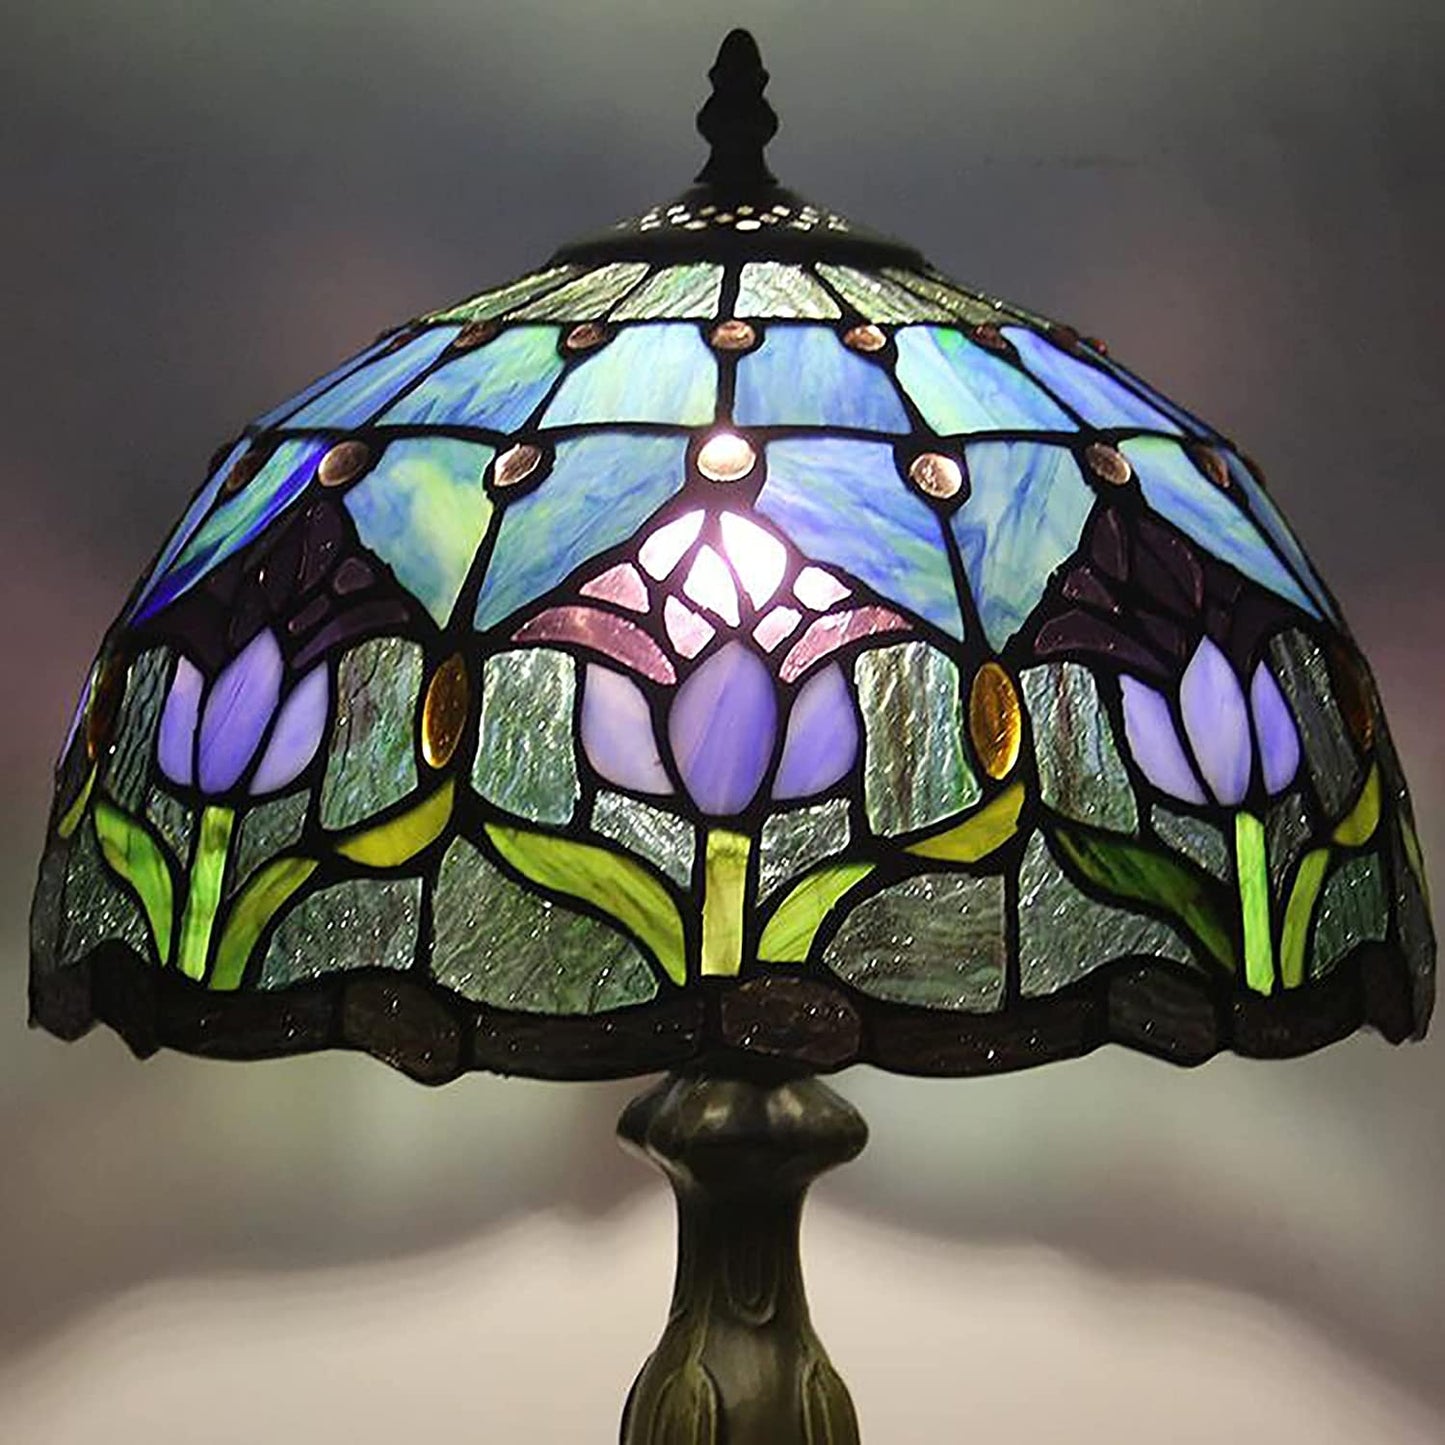 Errzom Tiffany Style Table Lamp Stained Glass Lamp Shade Purple Tulip Flower Reading Desk Light 12 Inches for Bedroom Study Living Room Office